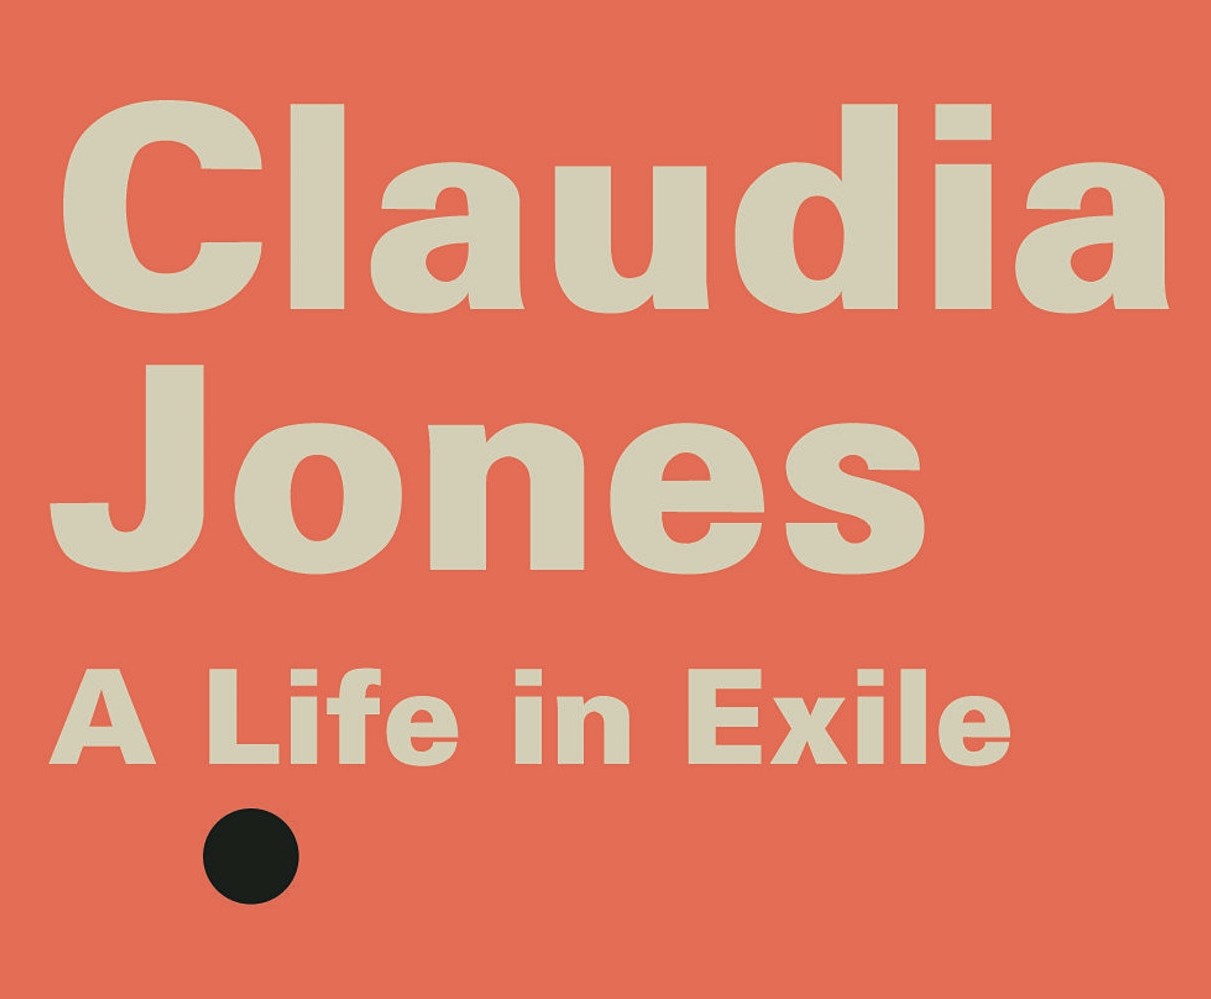 Claudia Jones a life in exile written on an orange background